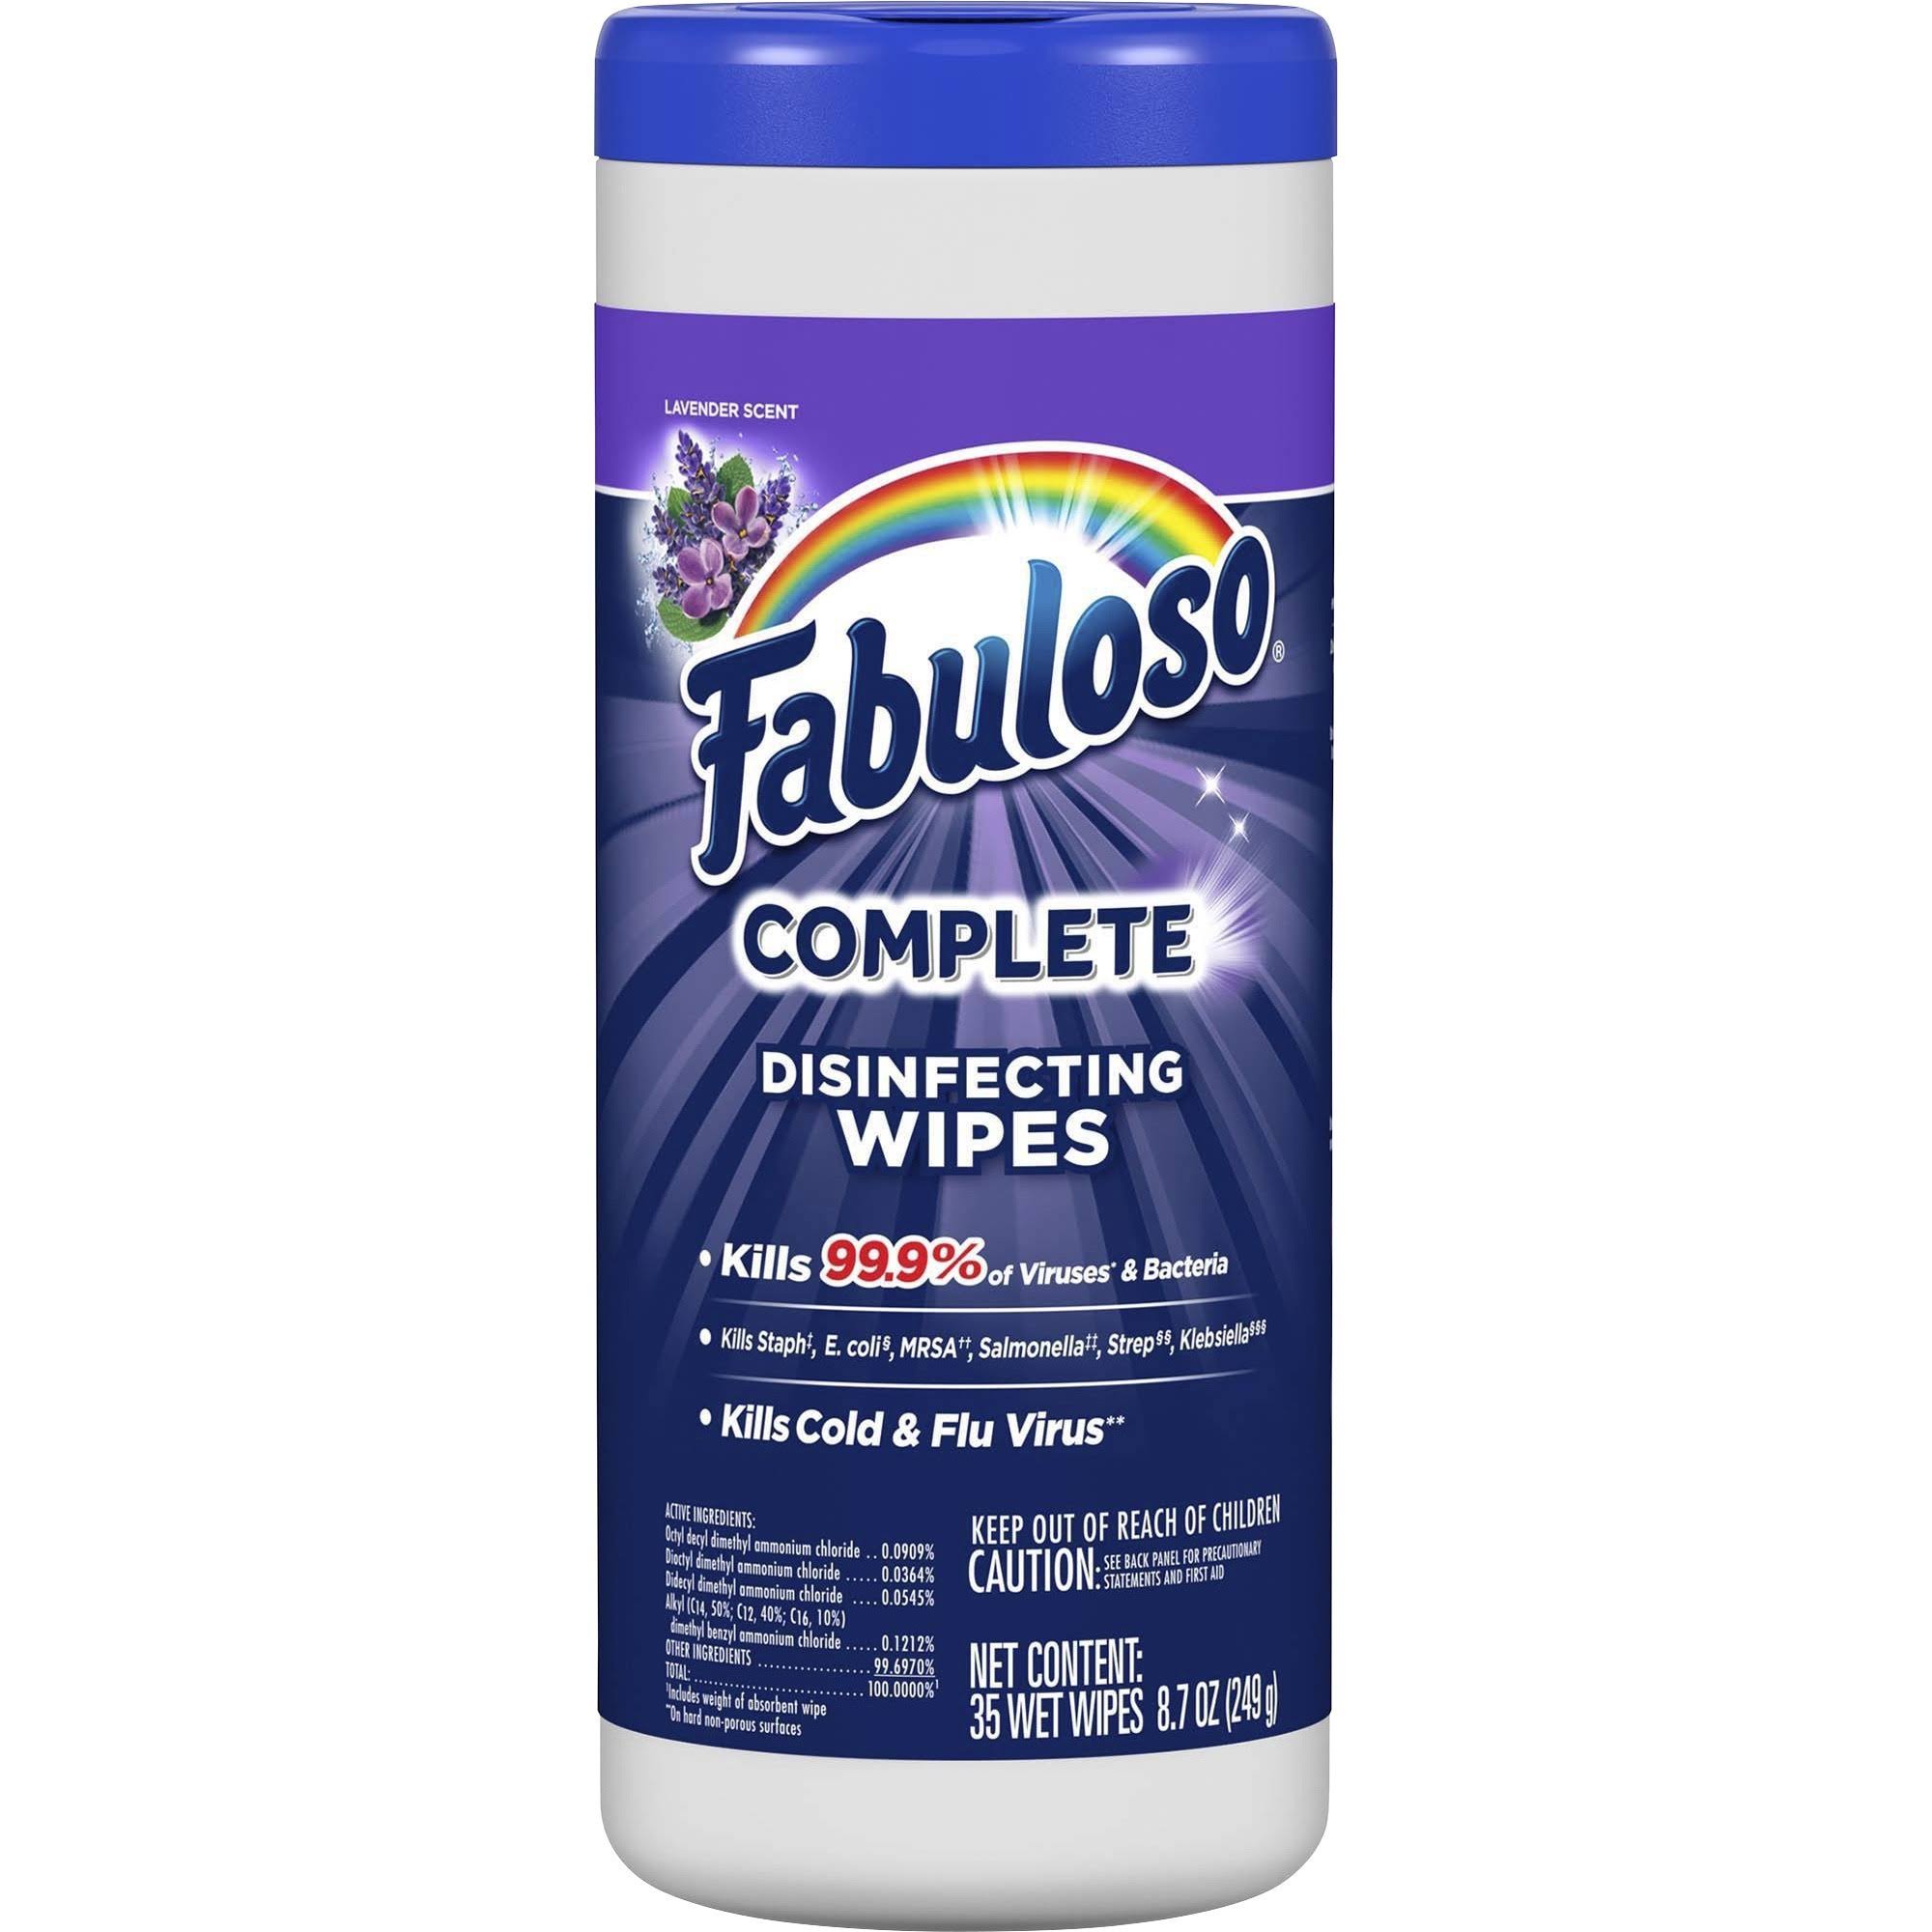 Fabuloso Complete Disinfecting Wipes, Lavender Scent - 35 wipes, 8.7 oz